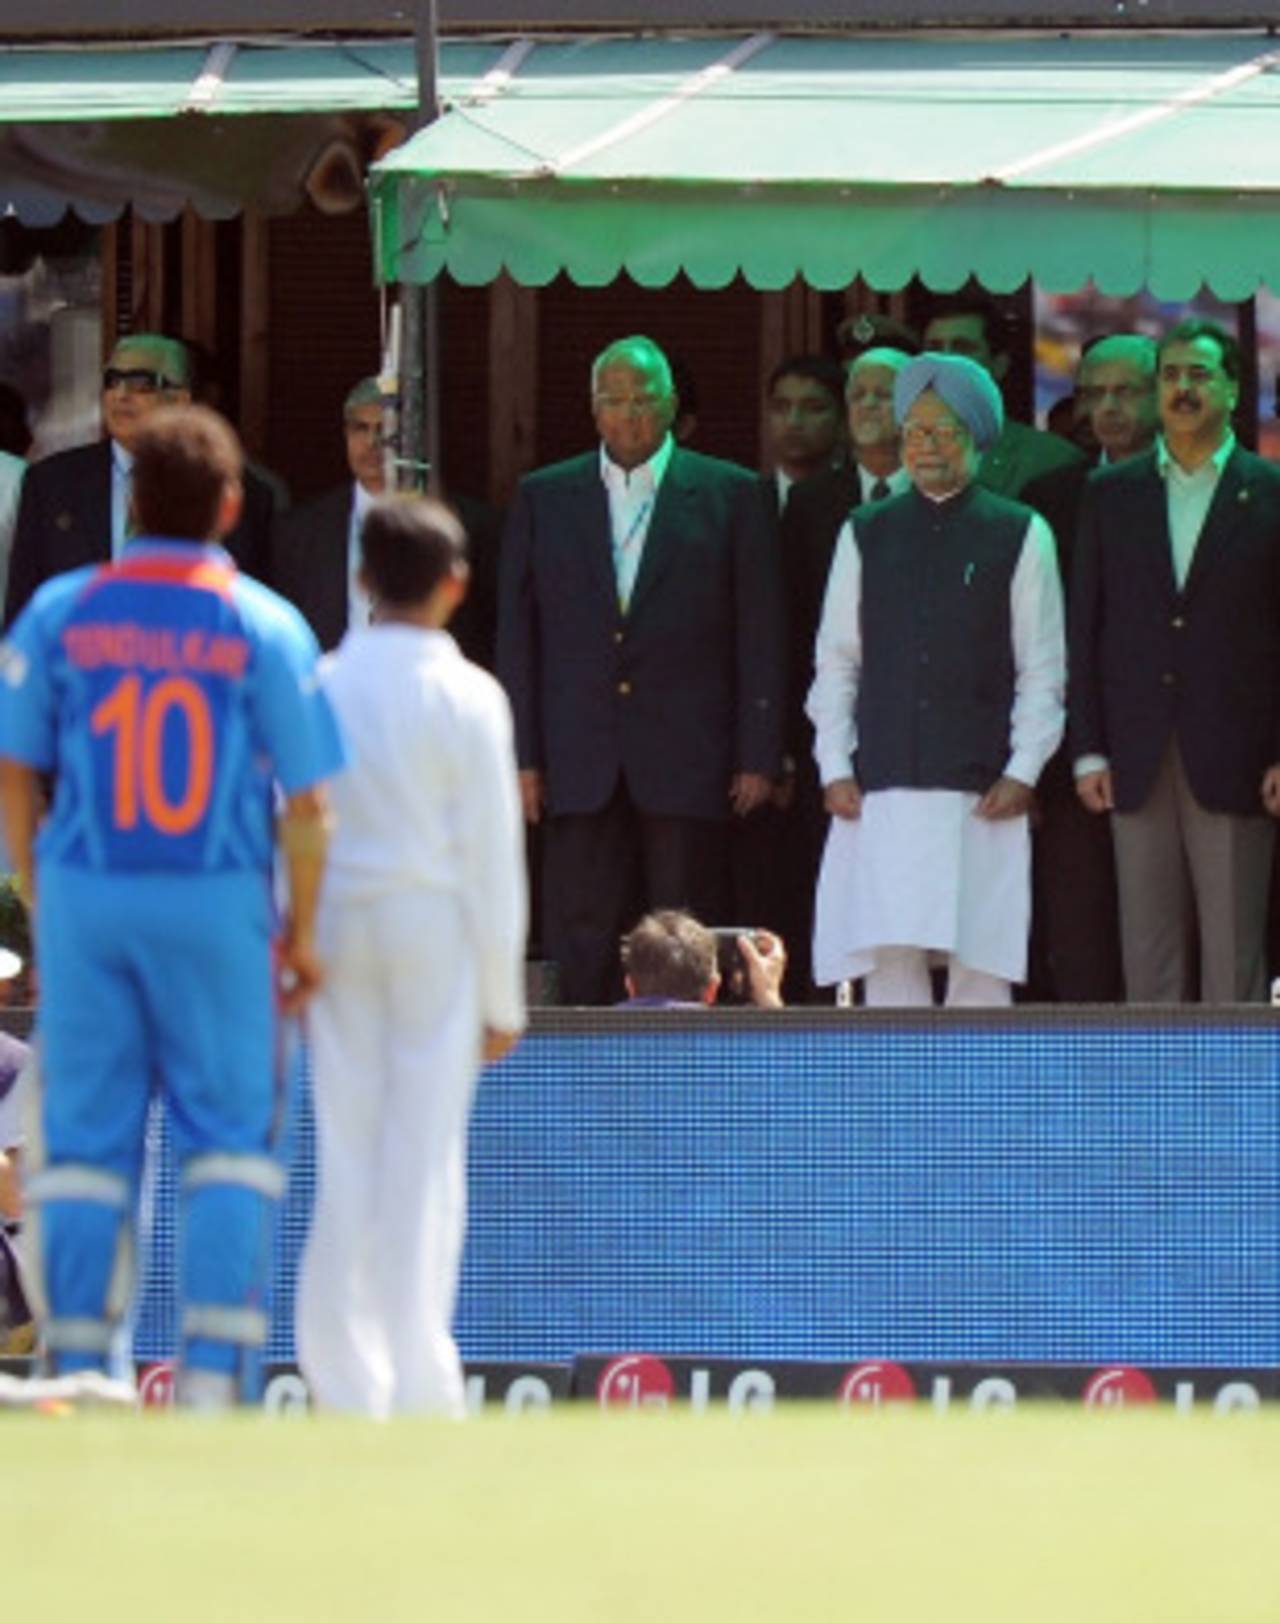 India PM Manmohan Singh and Pakistan PM Yousuf Raza Gilani stand for the national anthems prior to the match, India v Pakistan, 2nd semi-final, World Cup 2011, Mohali, March 30, 2011